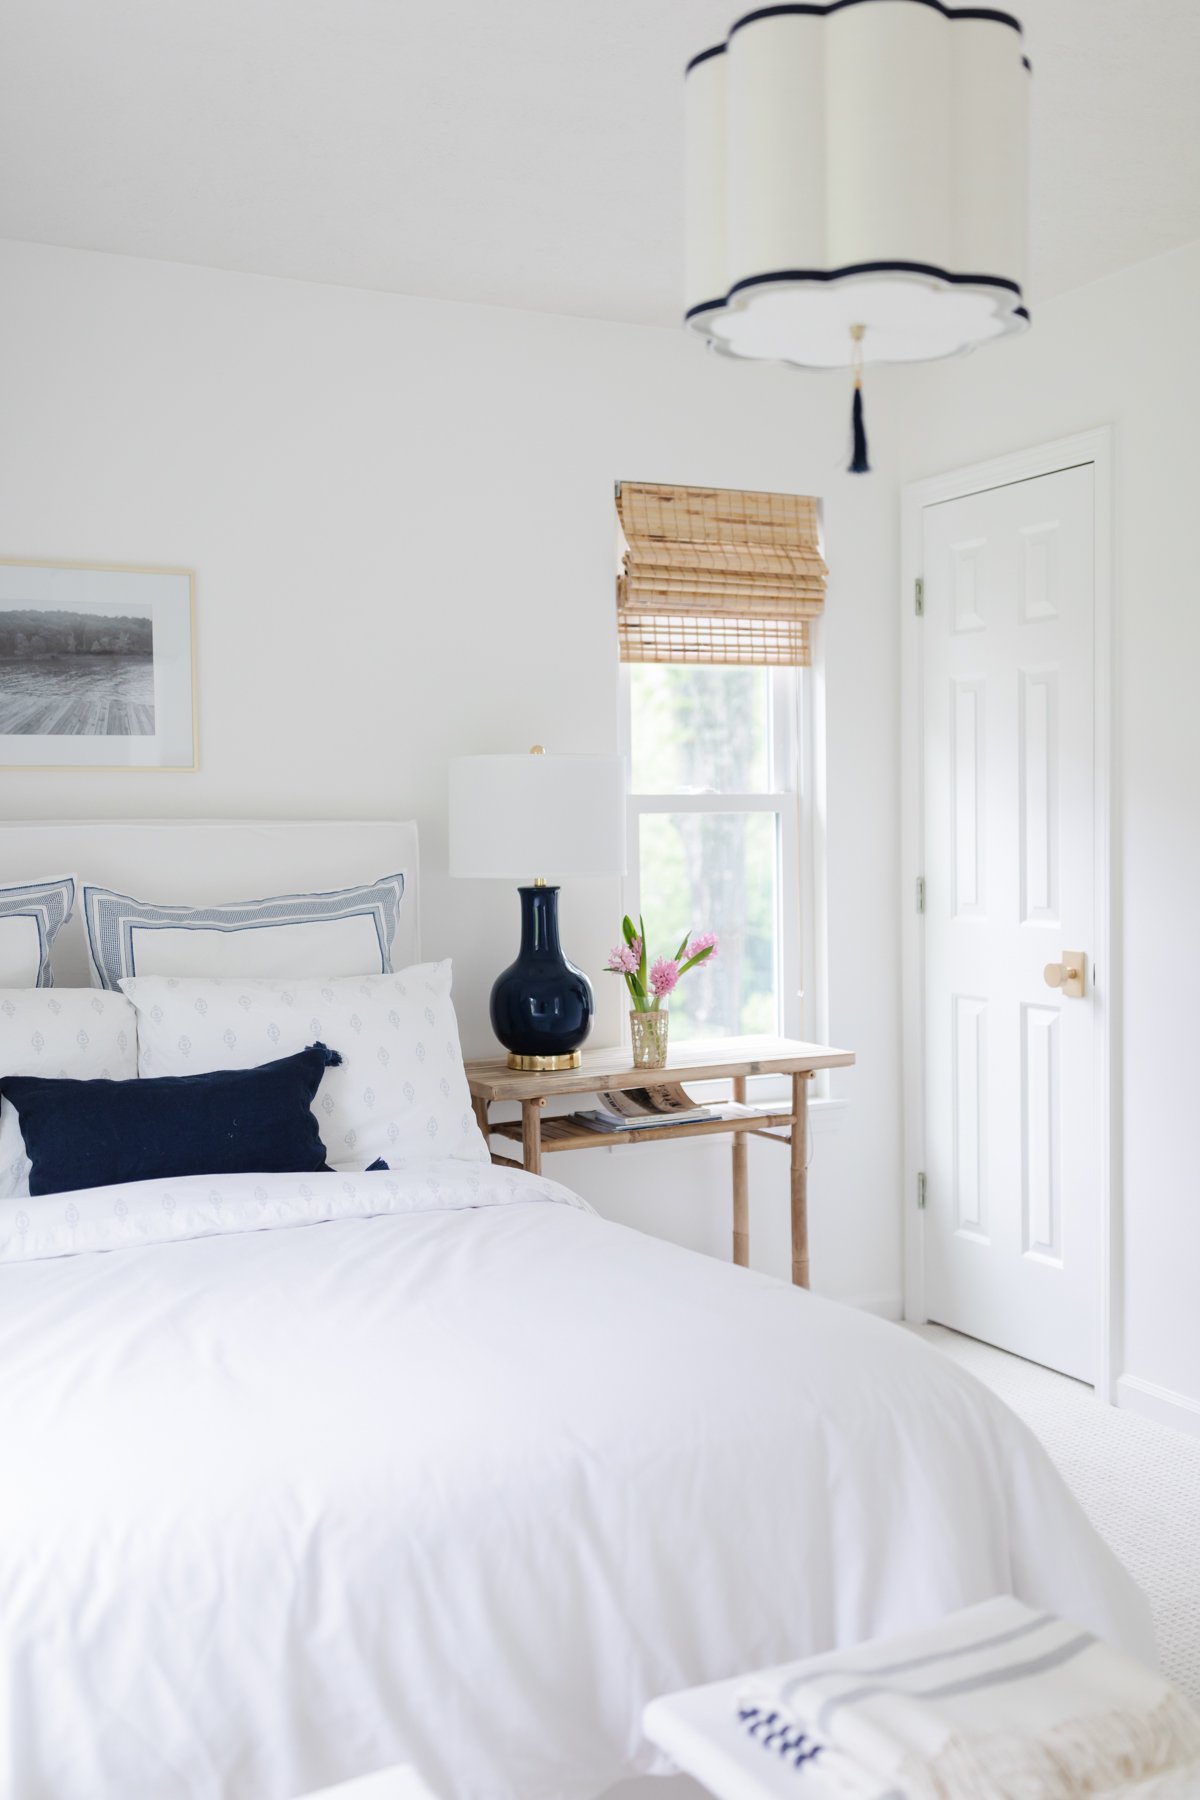 A guest room with white walls and bedding and rattan accents.